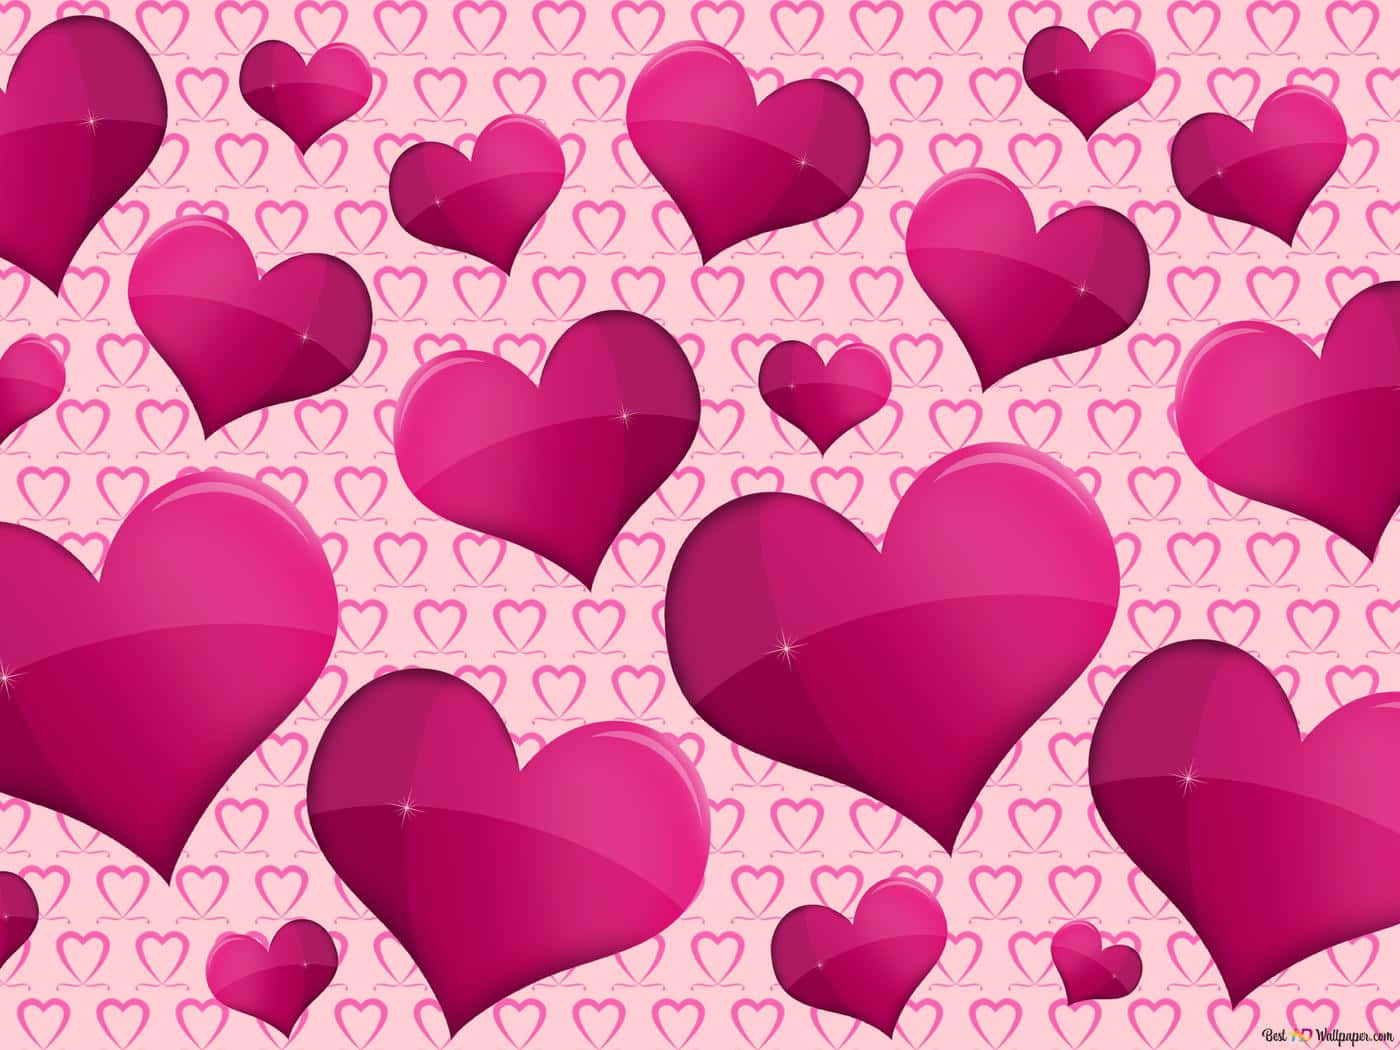 A Sweet Valentine's Day with Pink Hearts